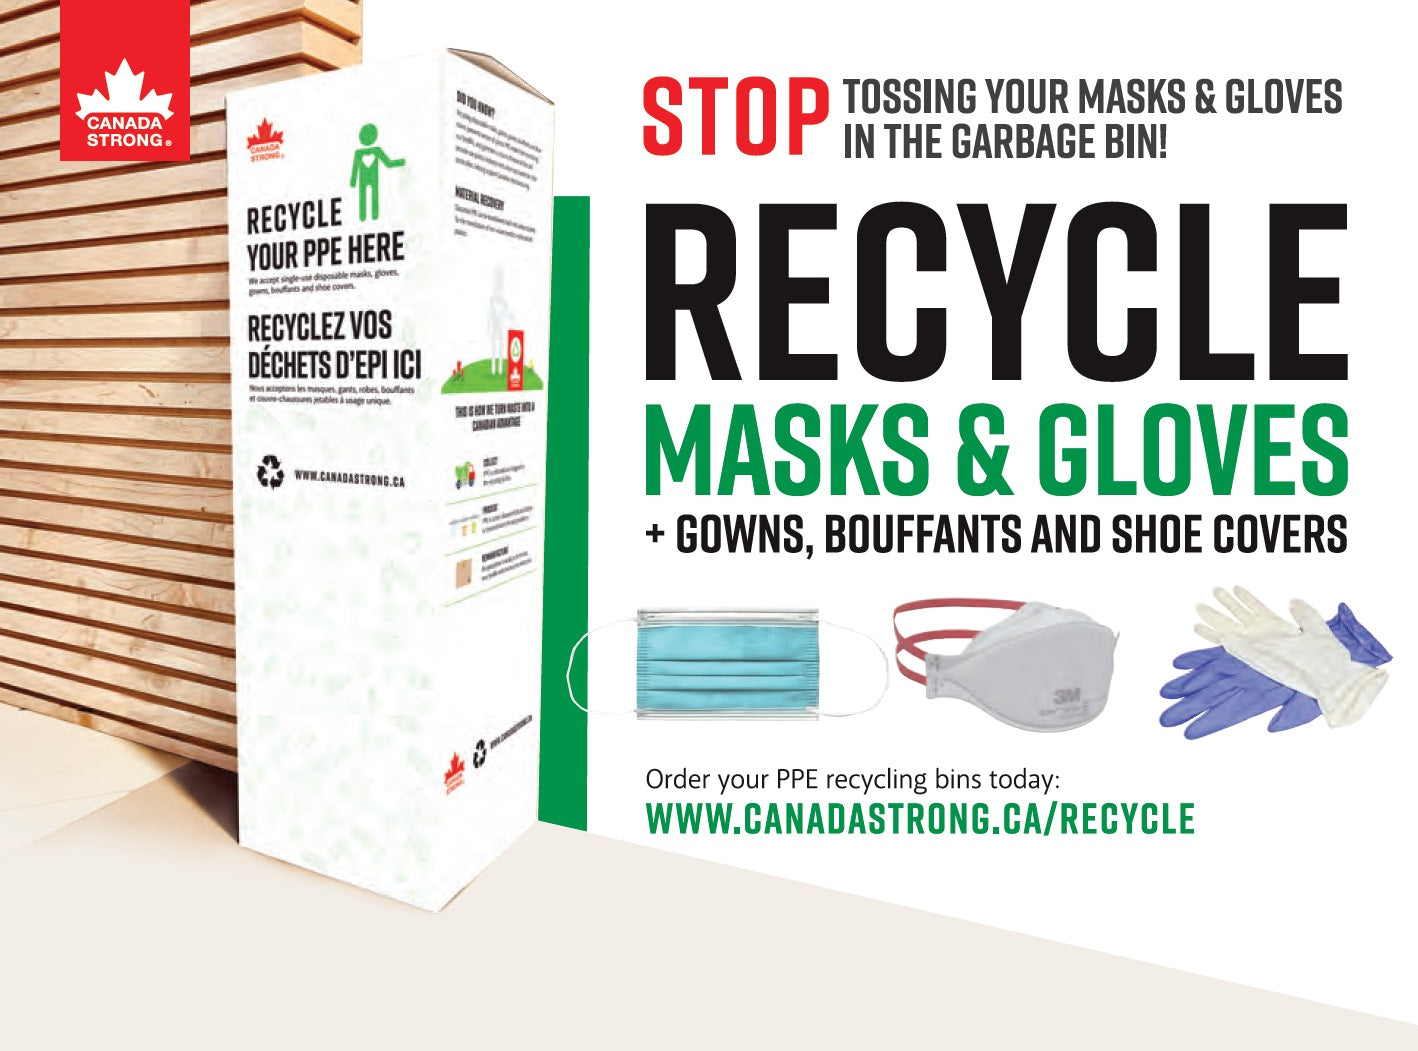 canada strong recycle bins for masks, gloves, gowns, bouffants, and shoe covers